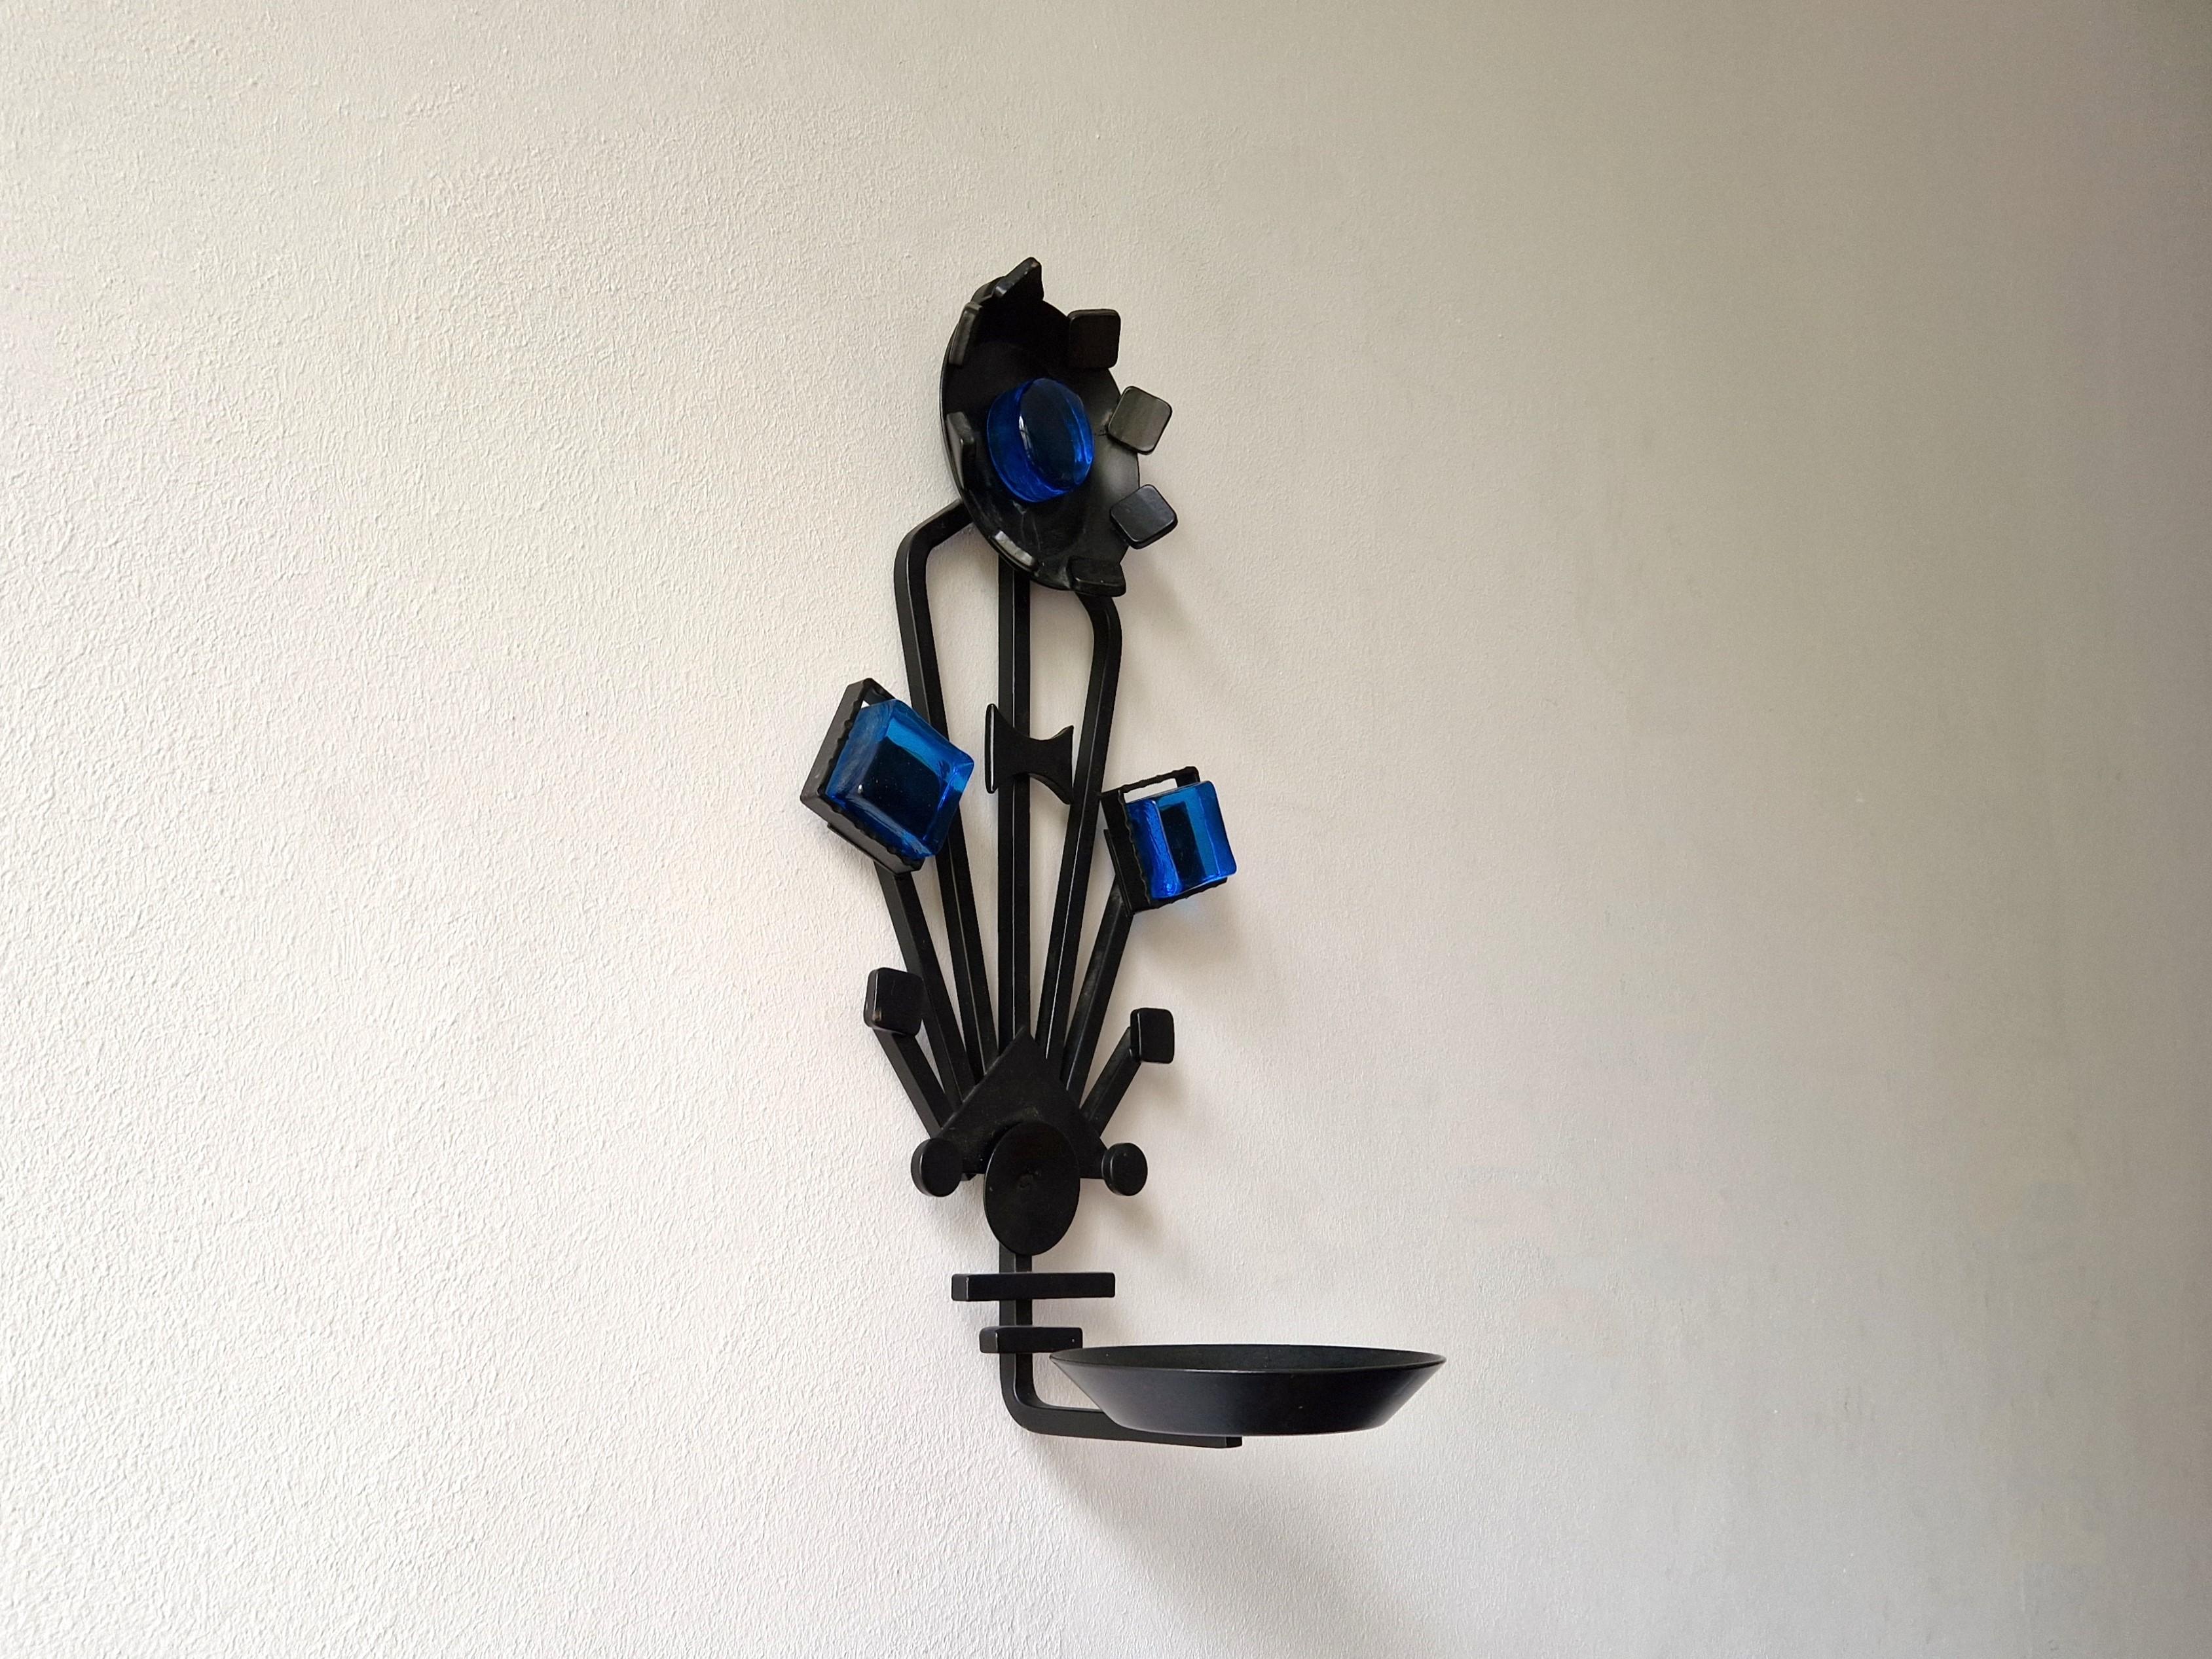 Mid-Century Modern Sculptural Iron and blue glass candle sconce for Dantoft, Denmark 1960's/1970's For Sale